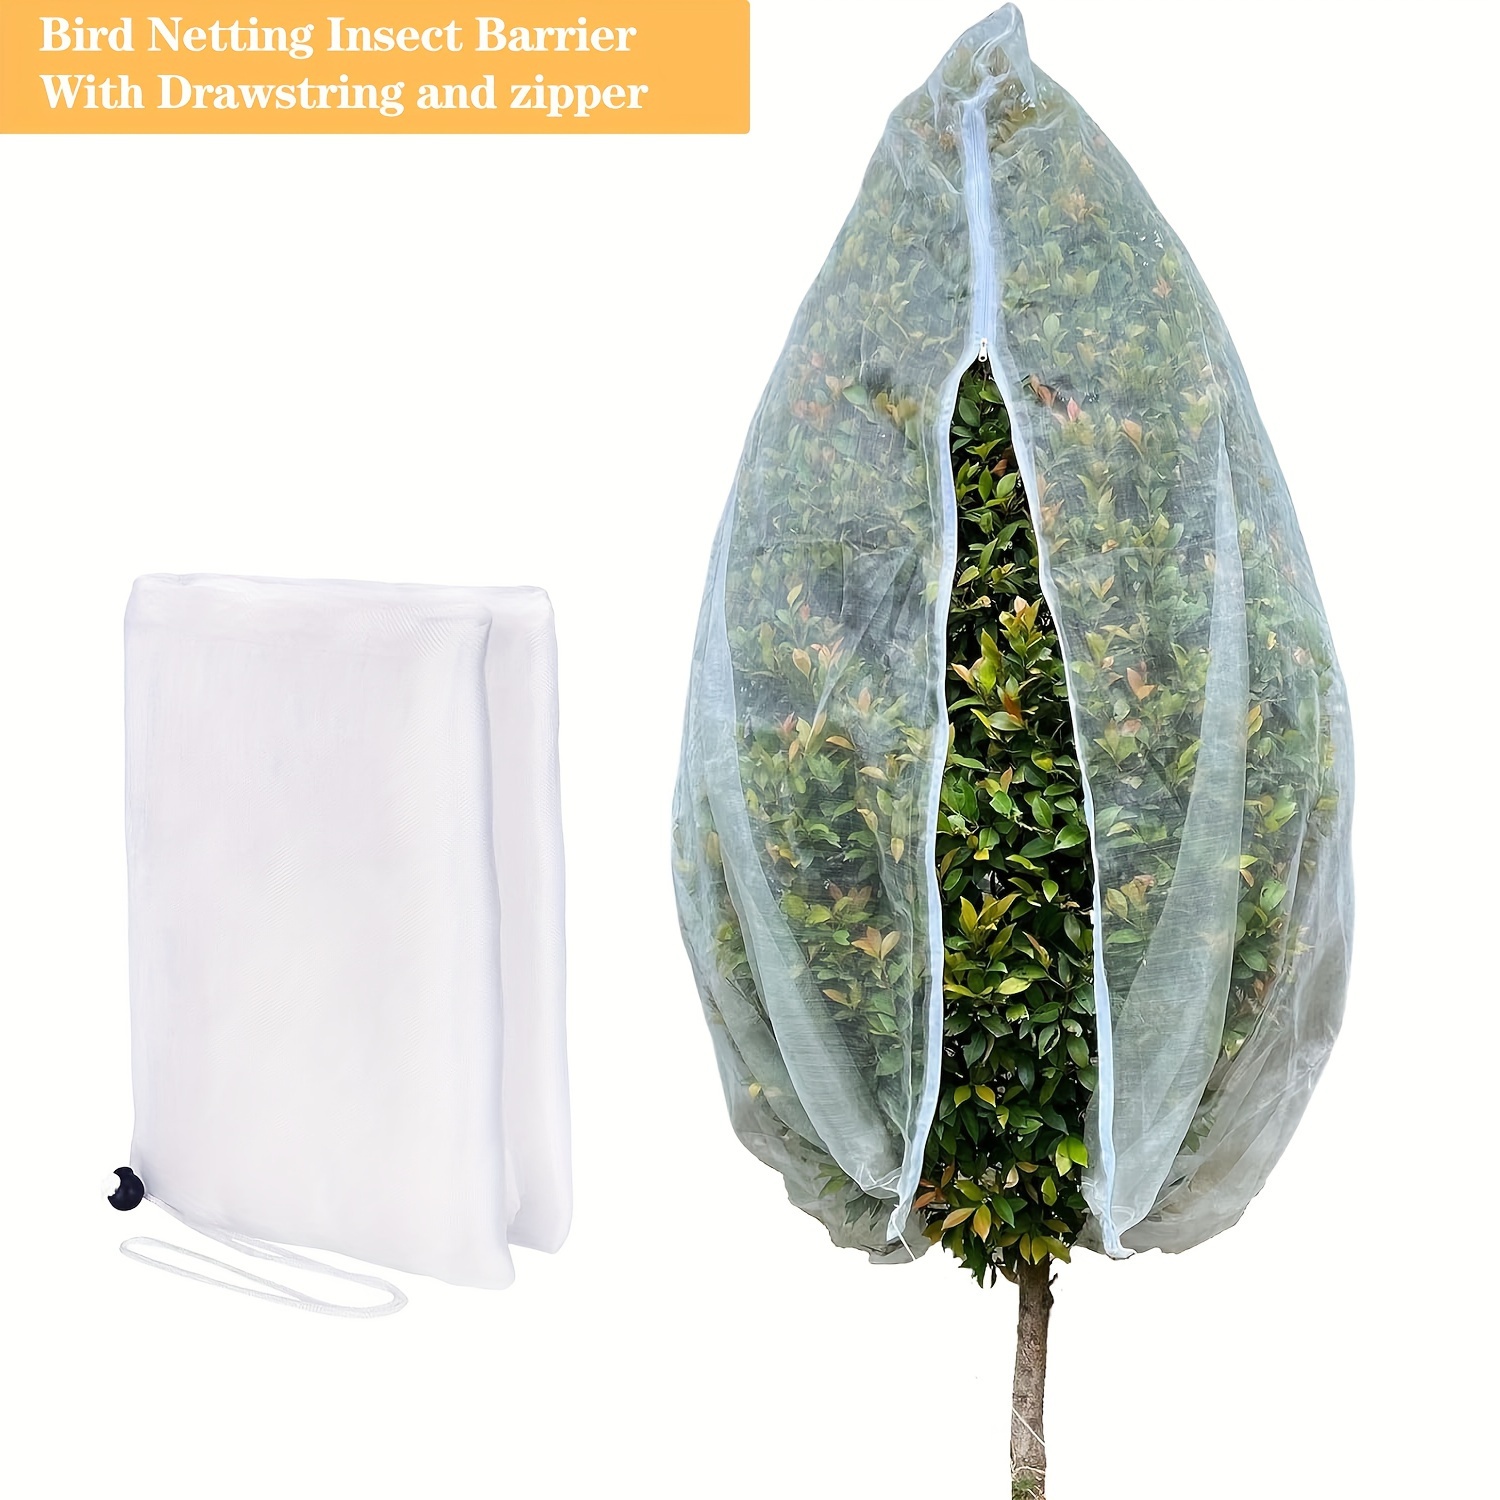 

1 Pack, Garden Netting, Insect Bird Barrier Netting Mesh With Drawstring And Zipper, Garden Bug Netting Plant Cover Fruit Tree Net For Protect Plant Fruits Citrus Flower From Insect Bird Eating